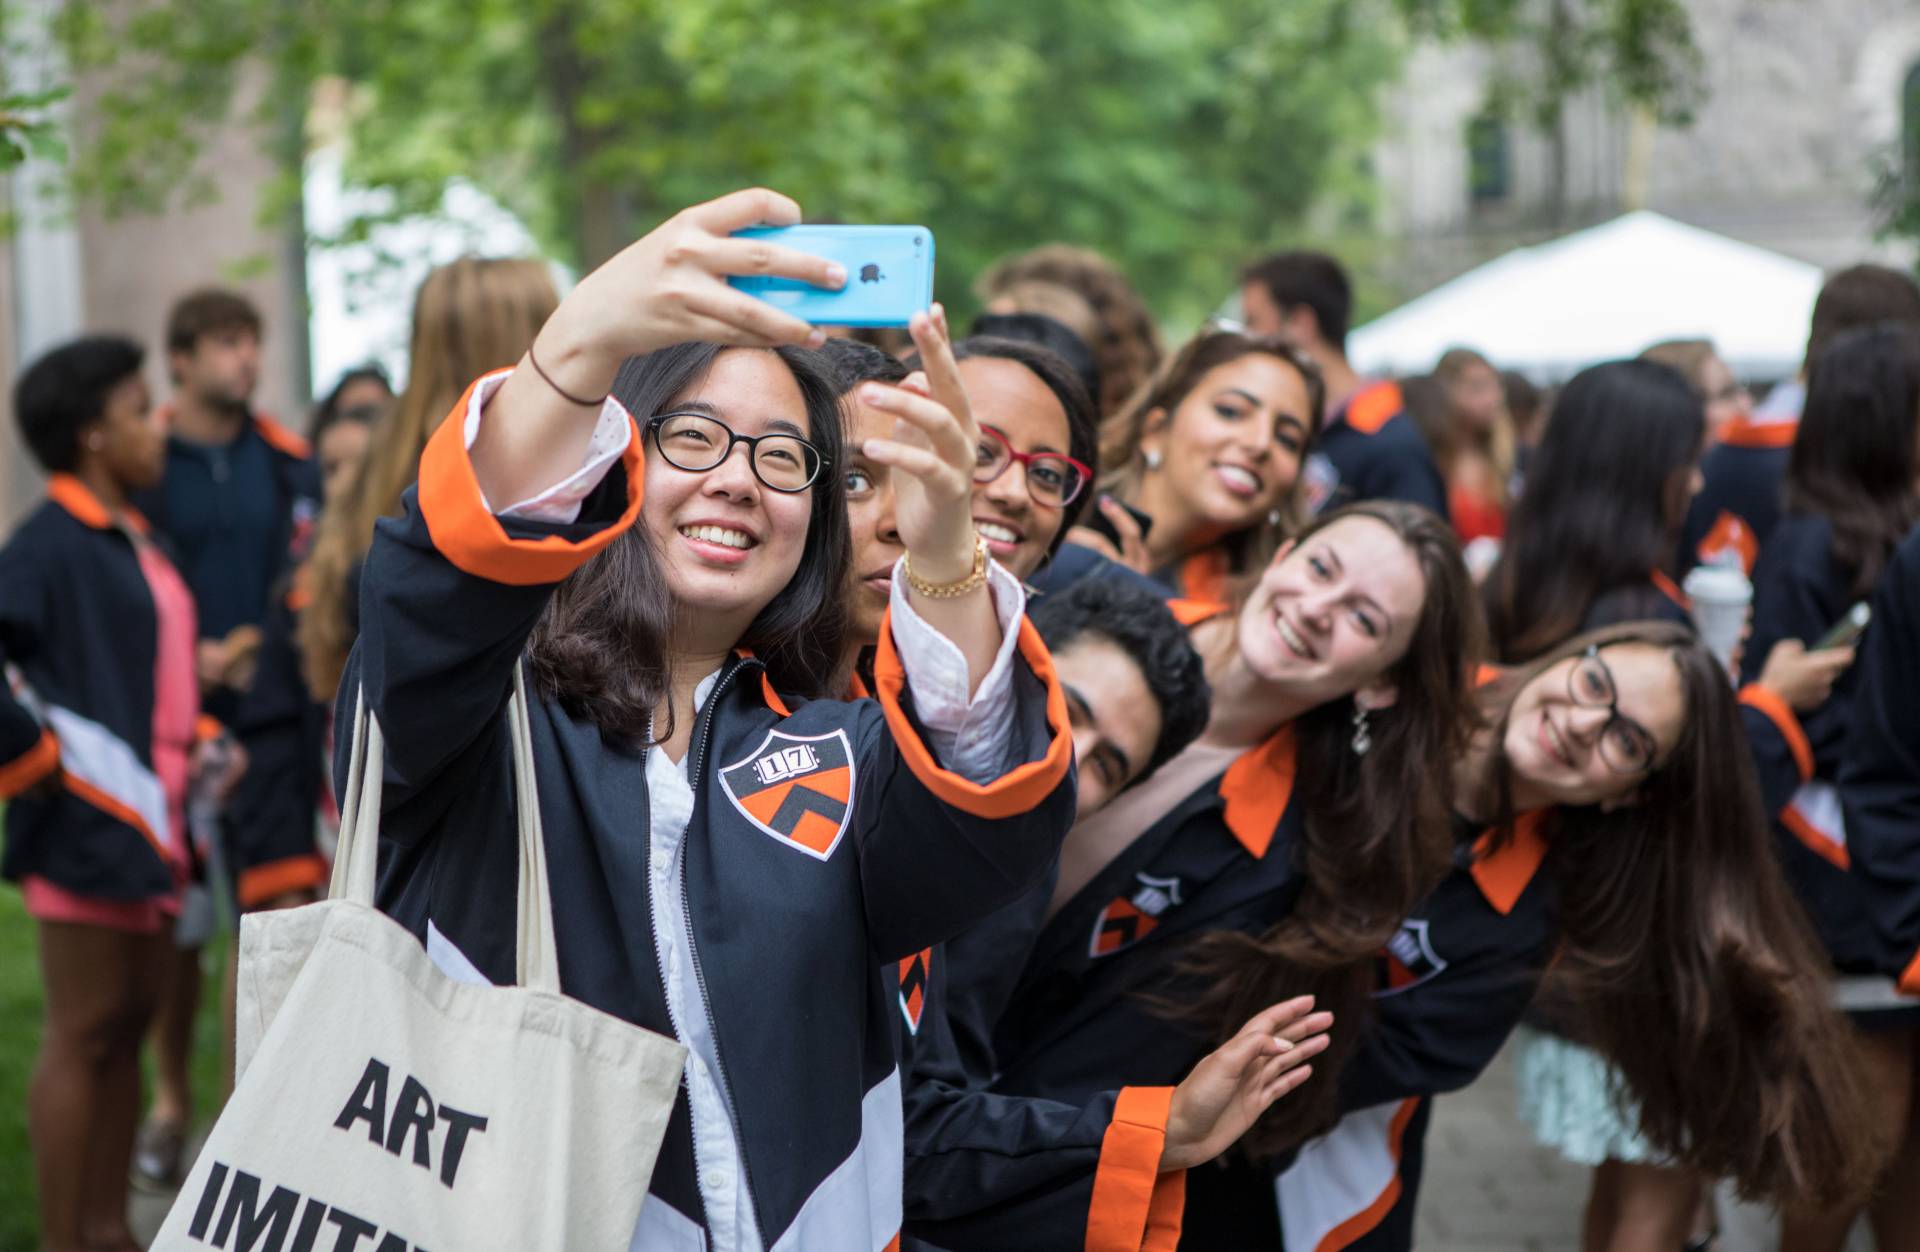 Students take selfie during Class Day 2017 ceremony